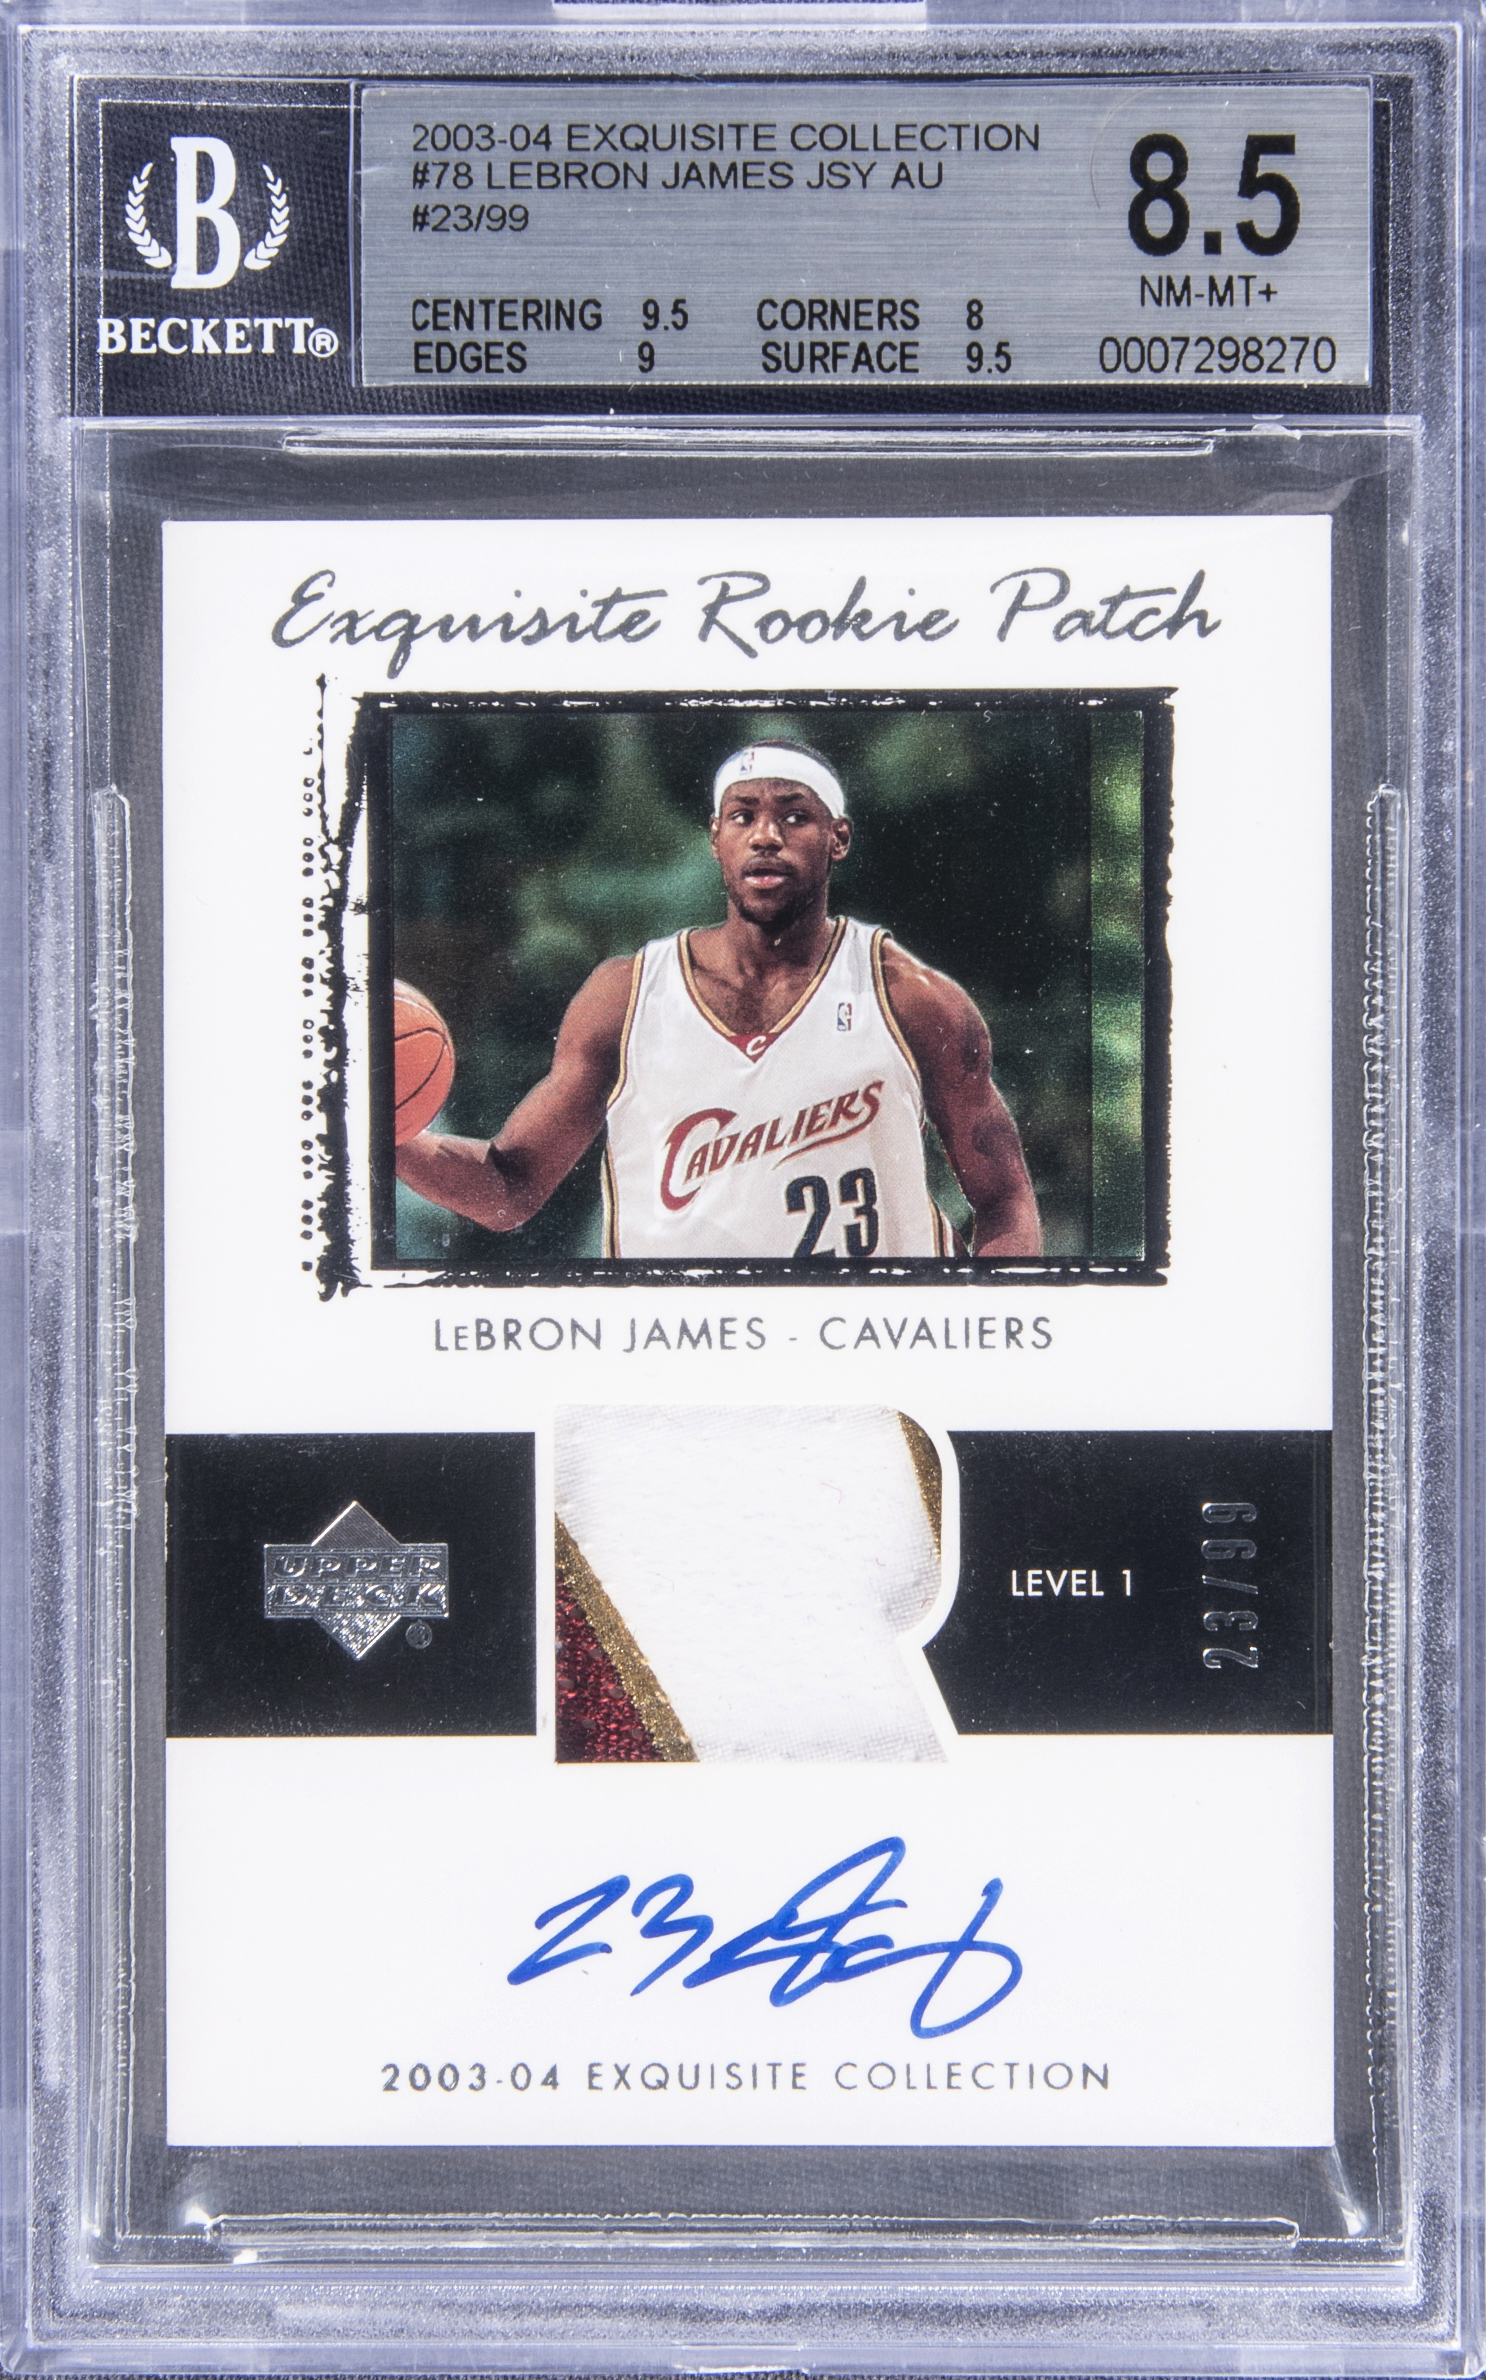 2003-04 UD "Exquisite Collection" Exquisite Rookie Patch Autograph (RPA) #78 LeBron James Signed Patch Rookie Card (#23/99) – LeBron's Jersey Number! – BGS NM-MT+ 8.5/BGS 10